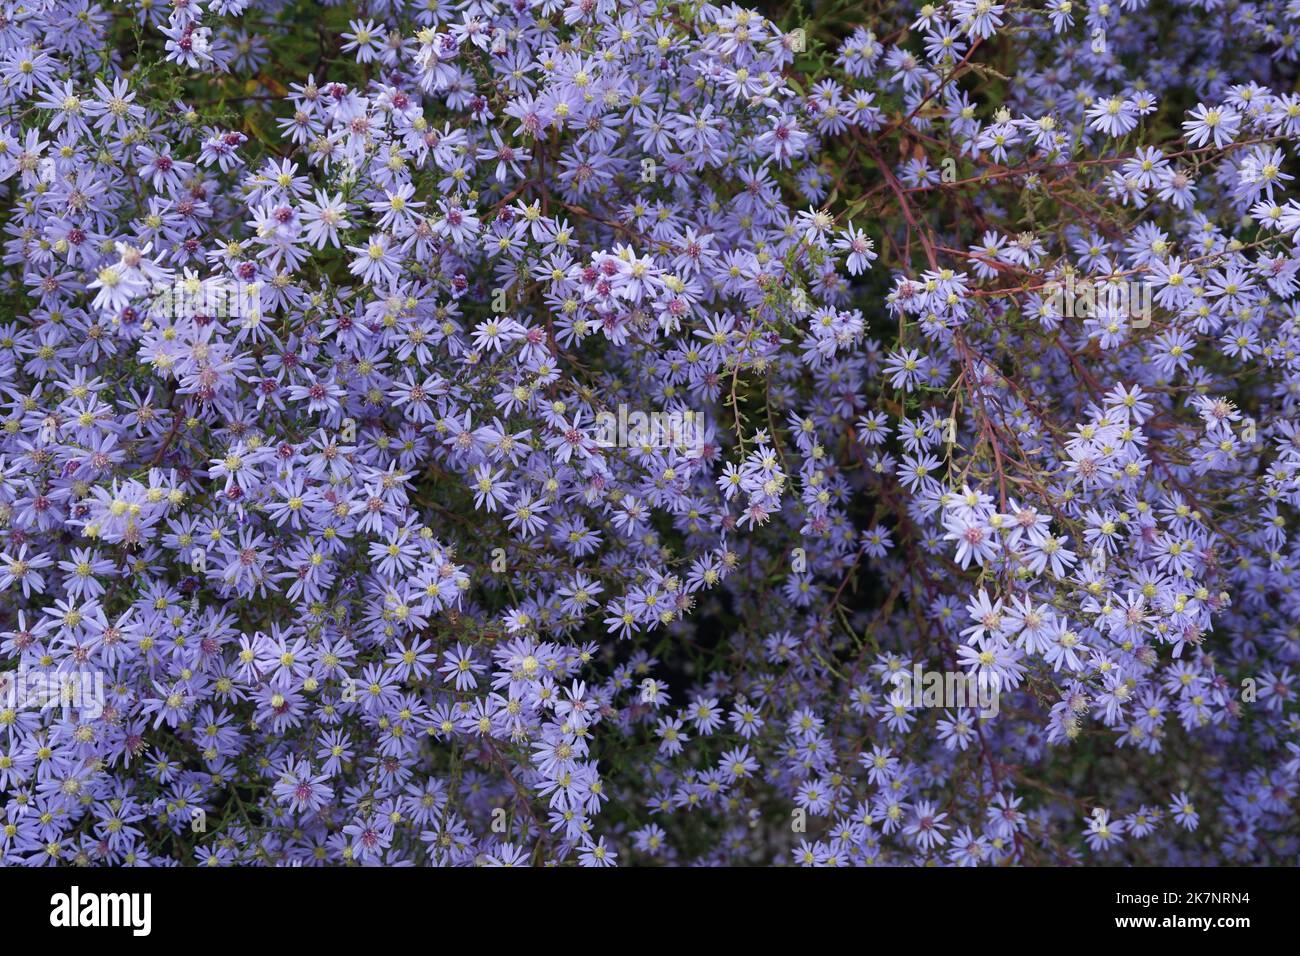 Cluster of Aster flowers Stock Photo